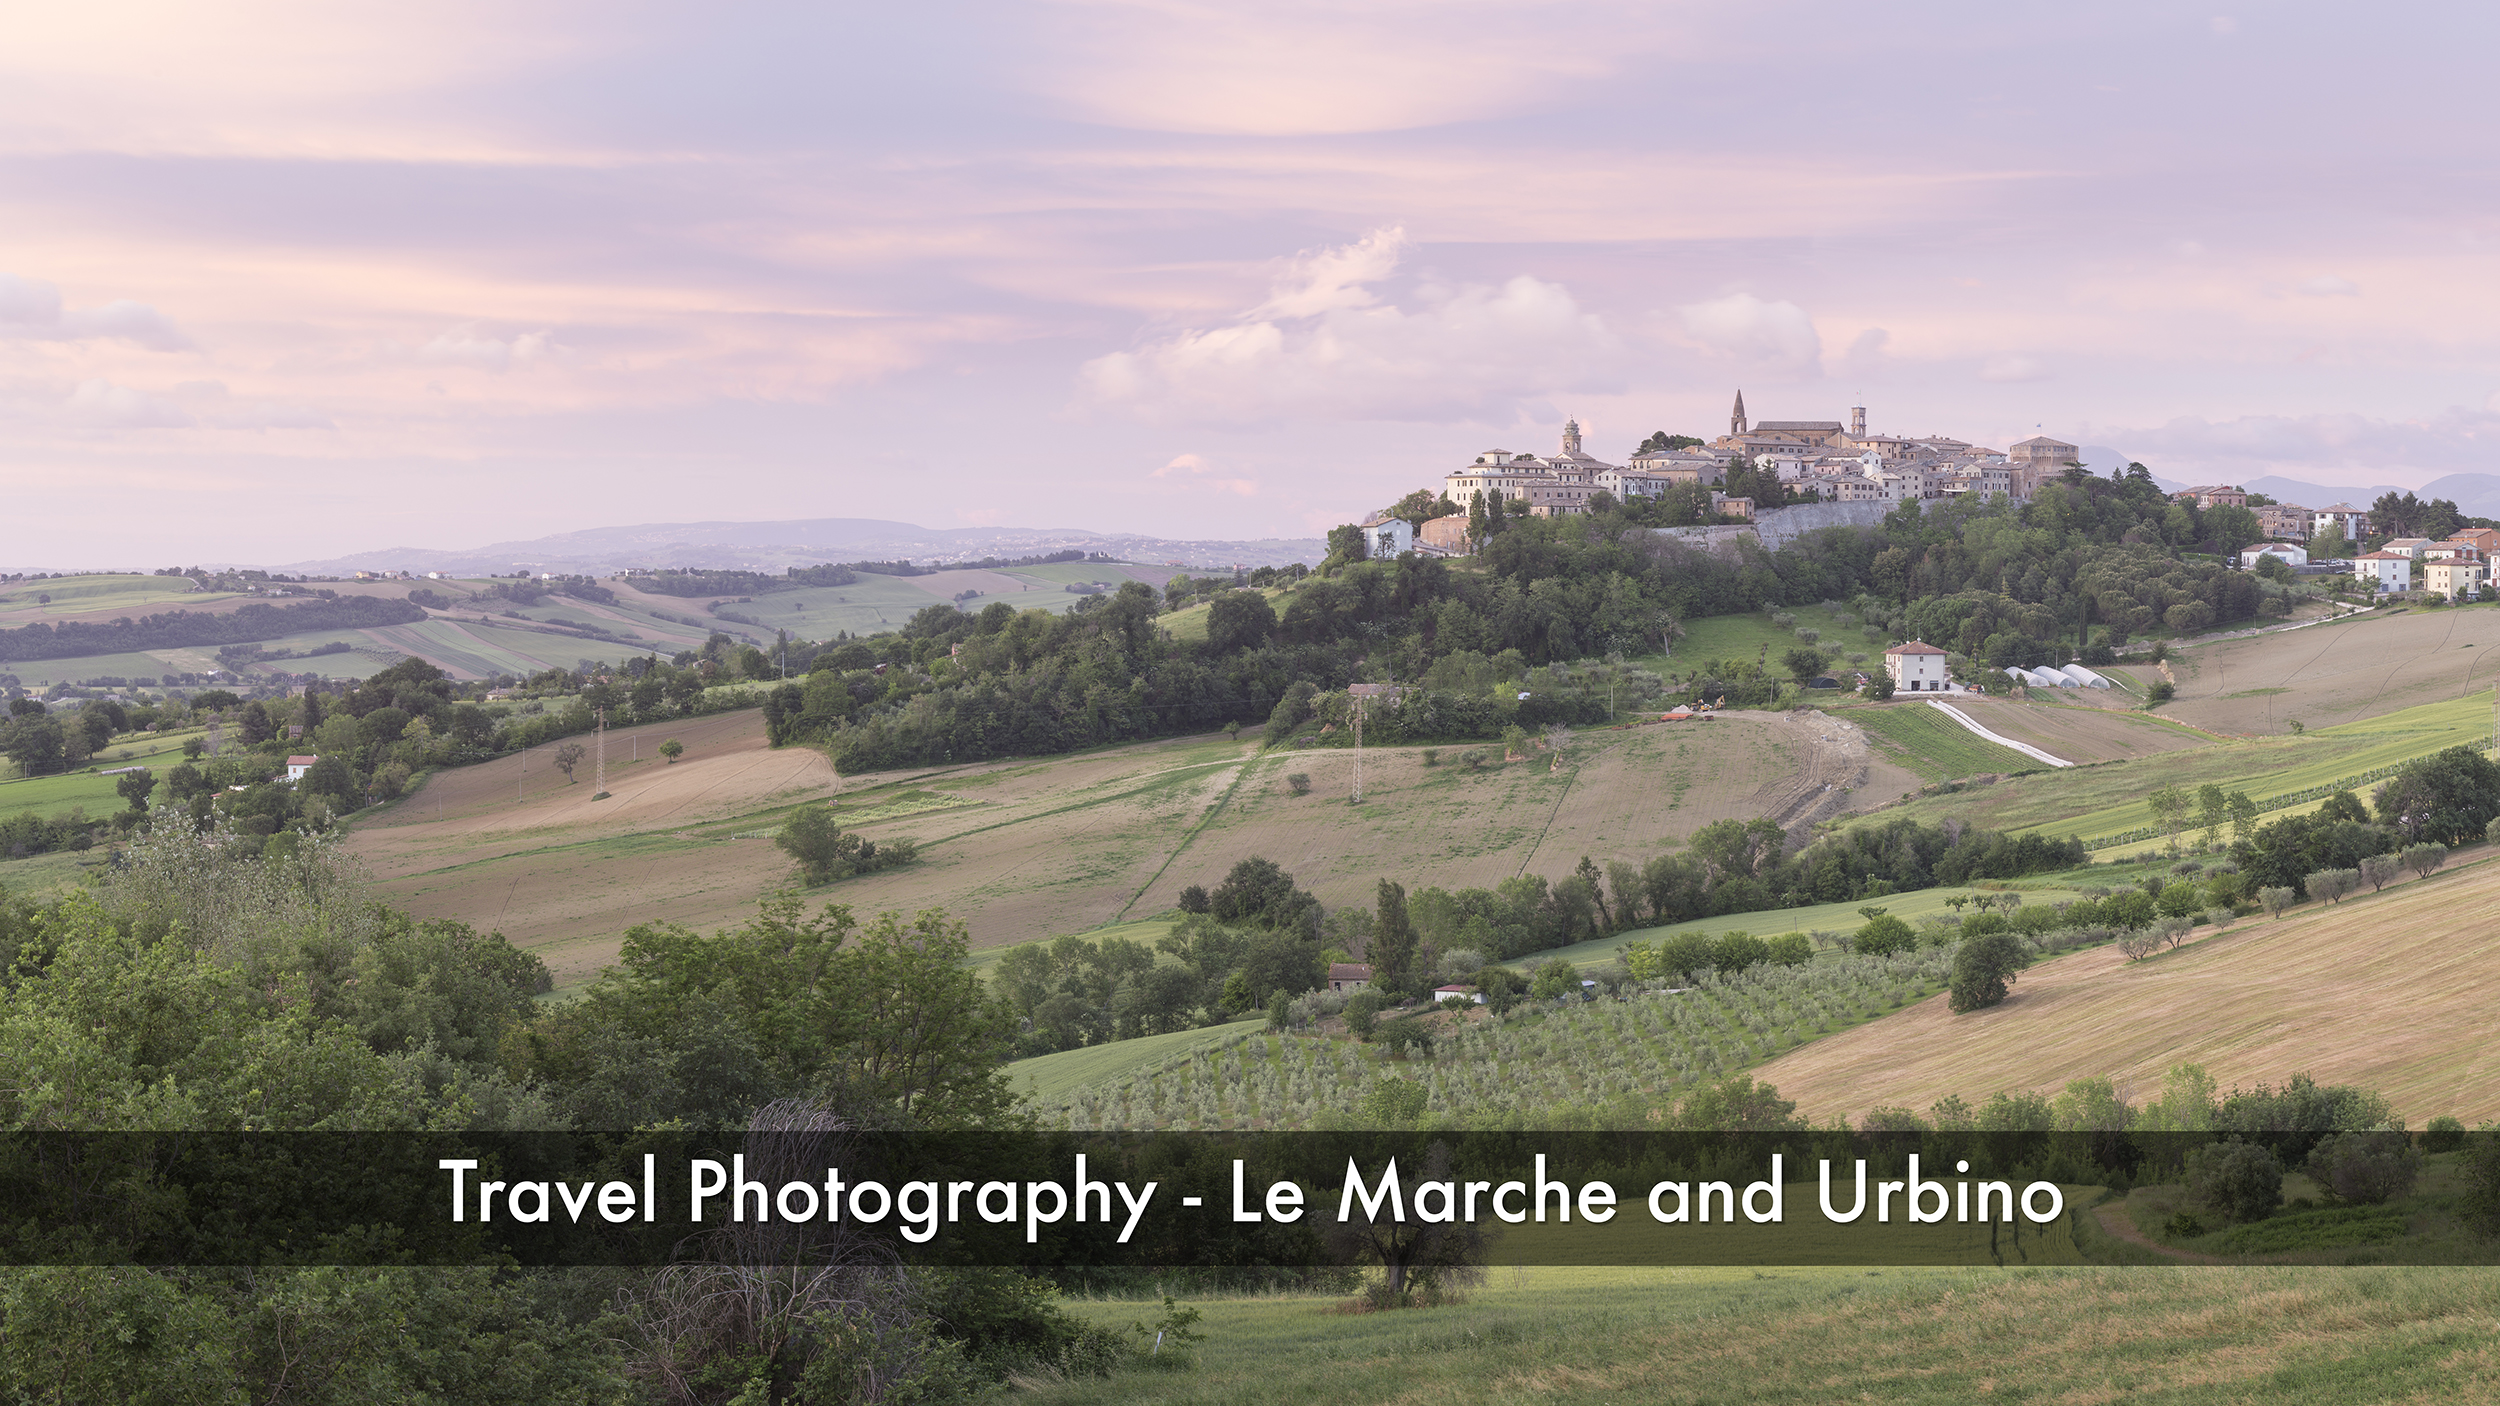 Le Marche and Urbino, Italy. Travel photography in Italy.